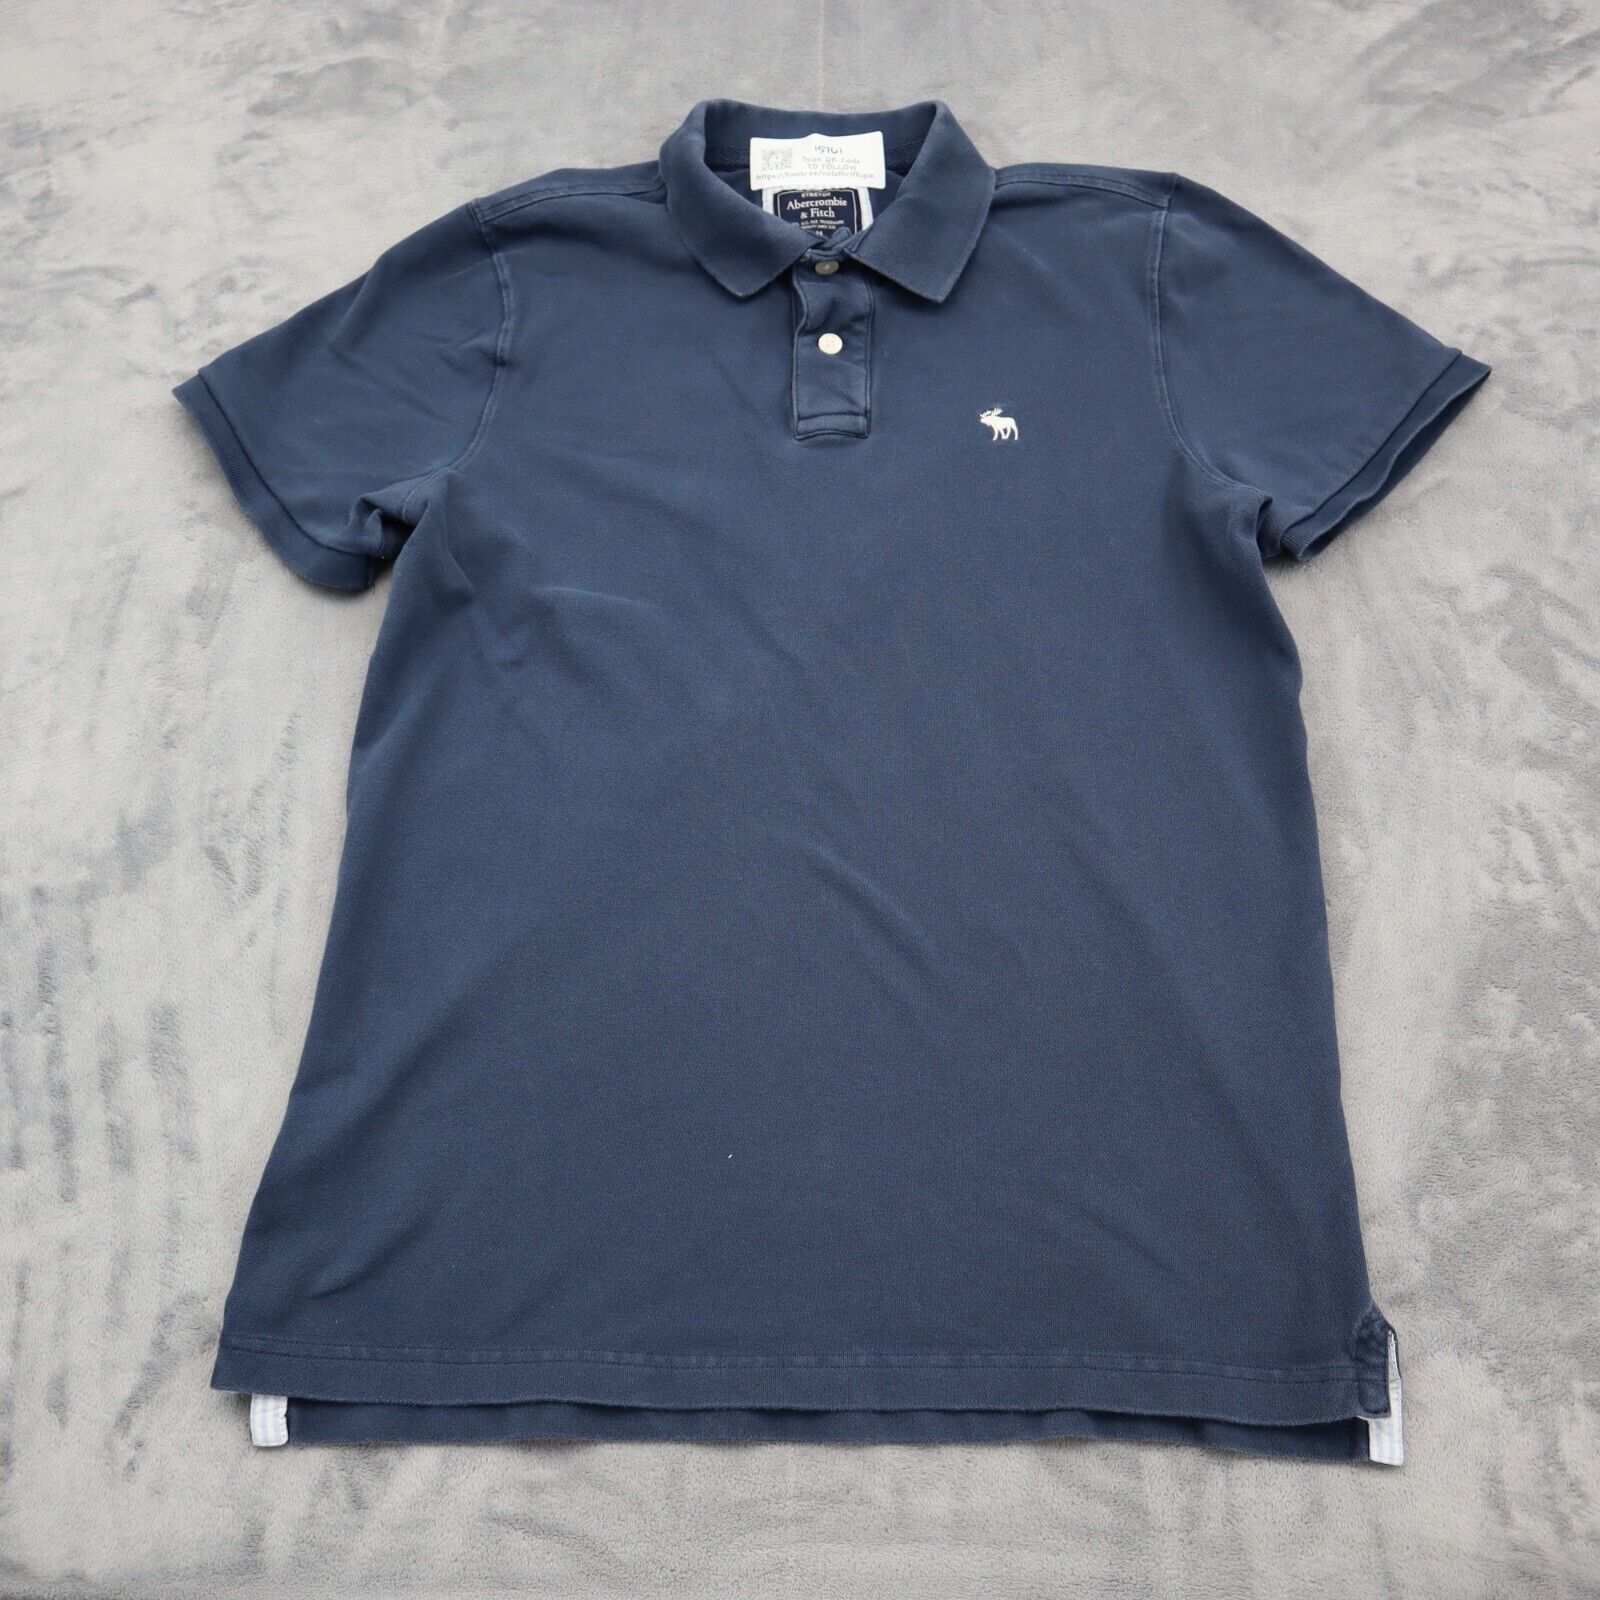 Primary image for Abercrombie Fitch Shirt Mens M Blue Polo Chest Button Short Sleeve Collared Top